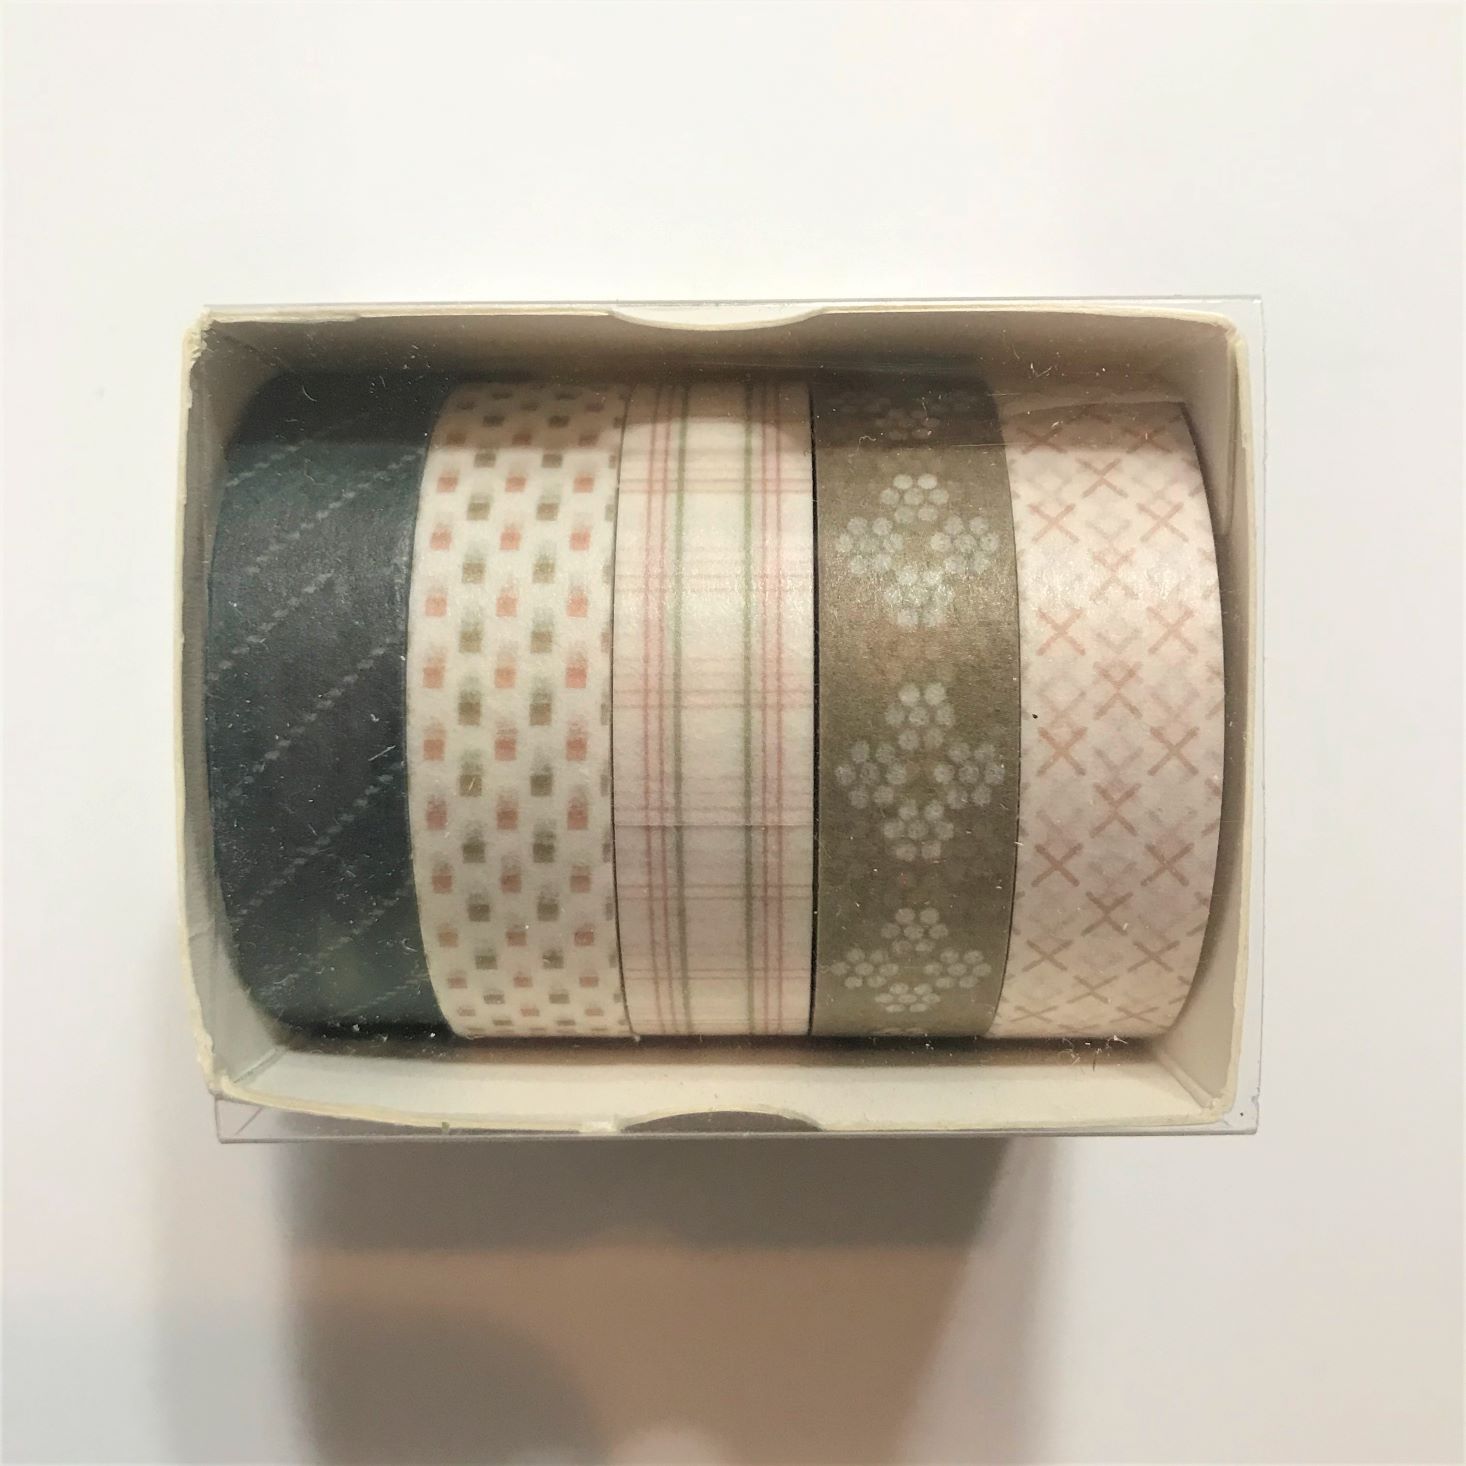 Adults and Crafts December 2019 washi tape in box